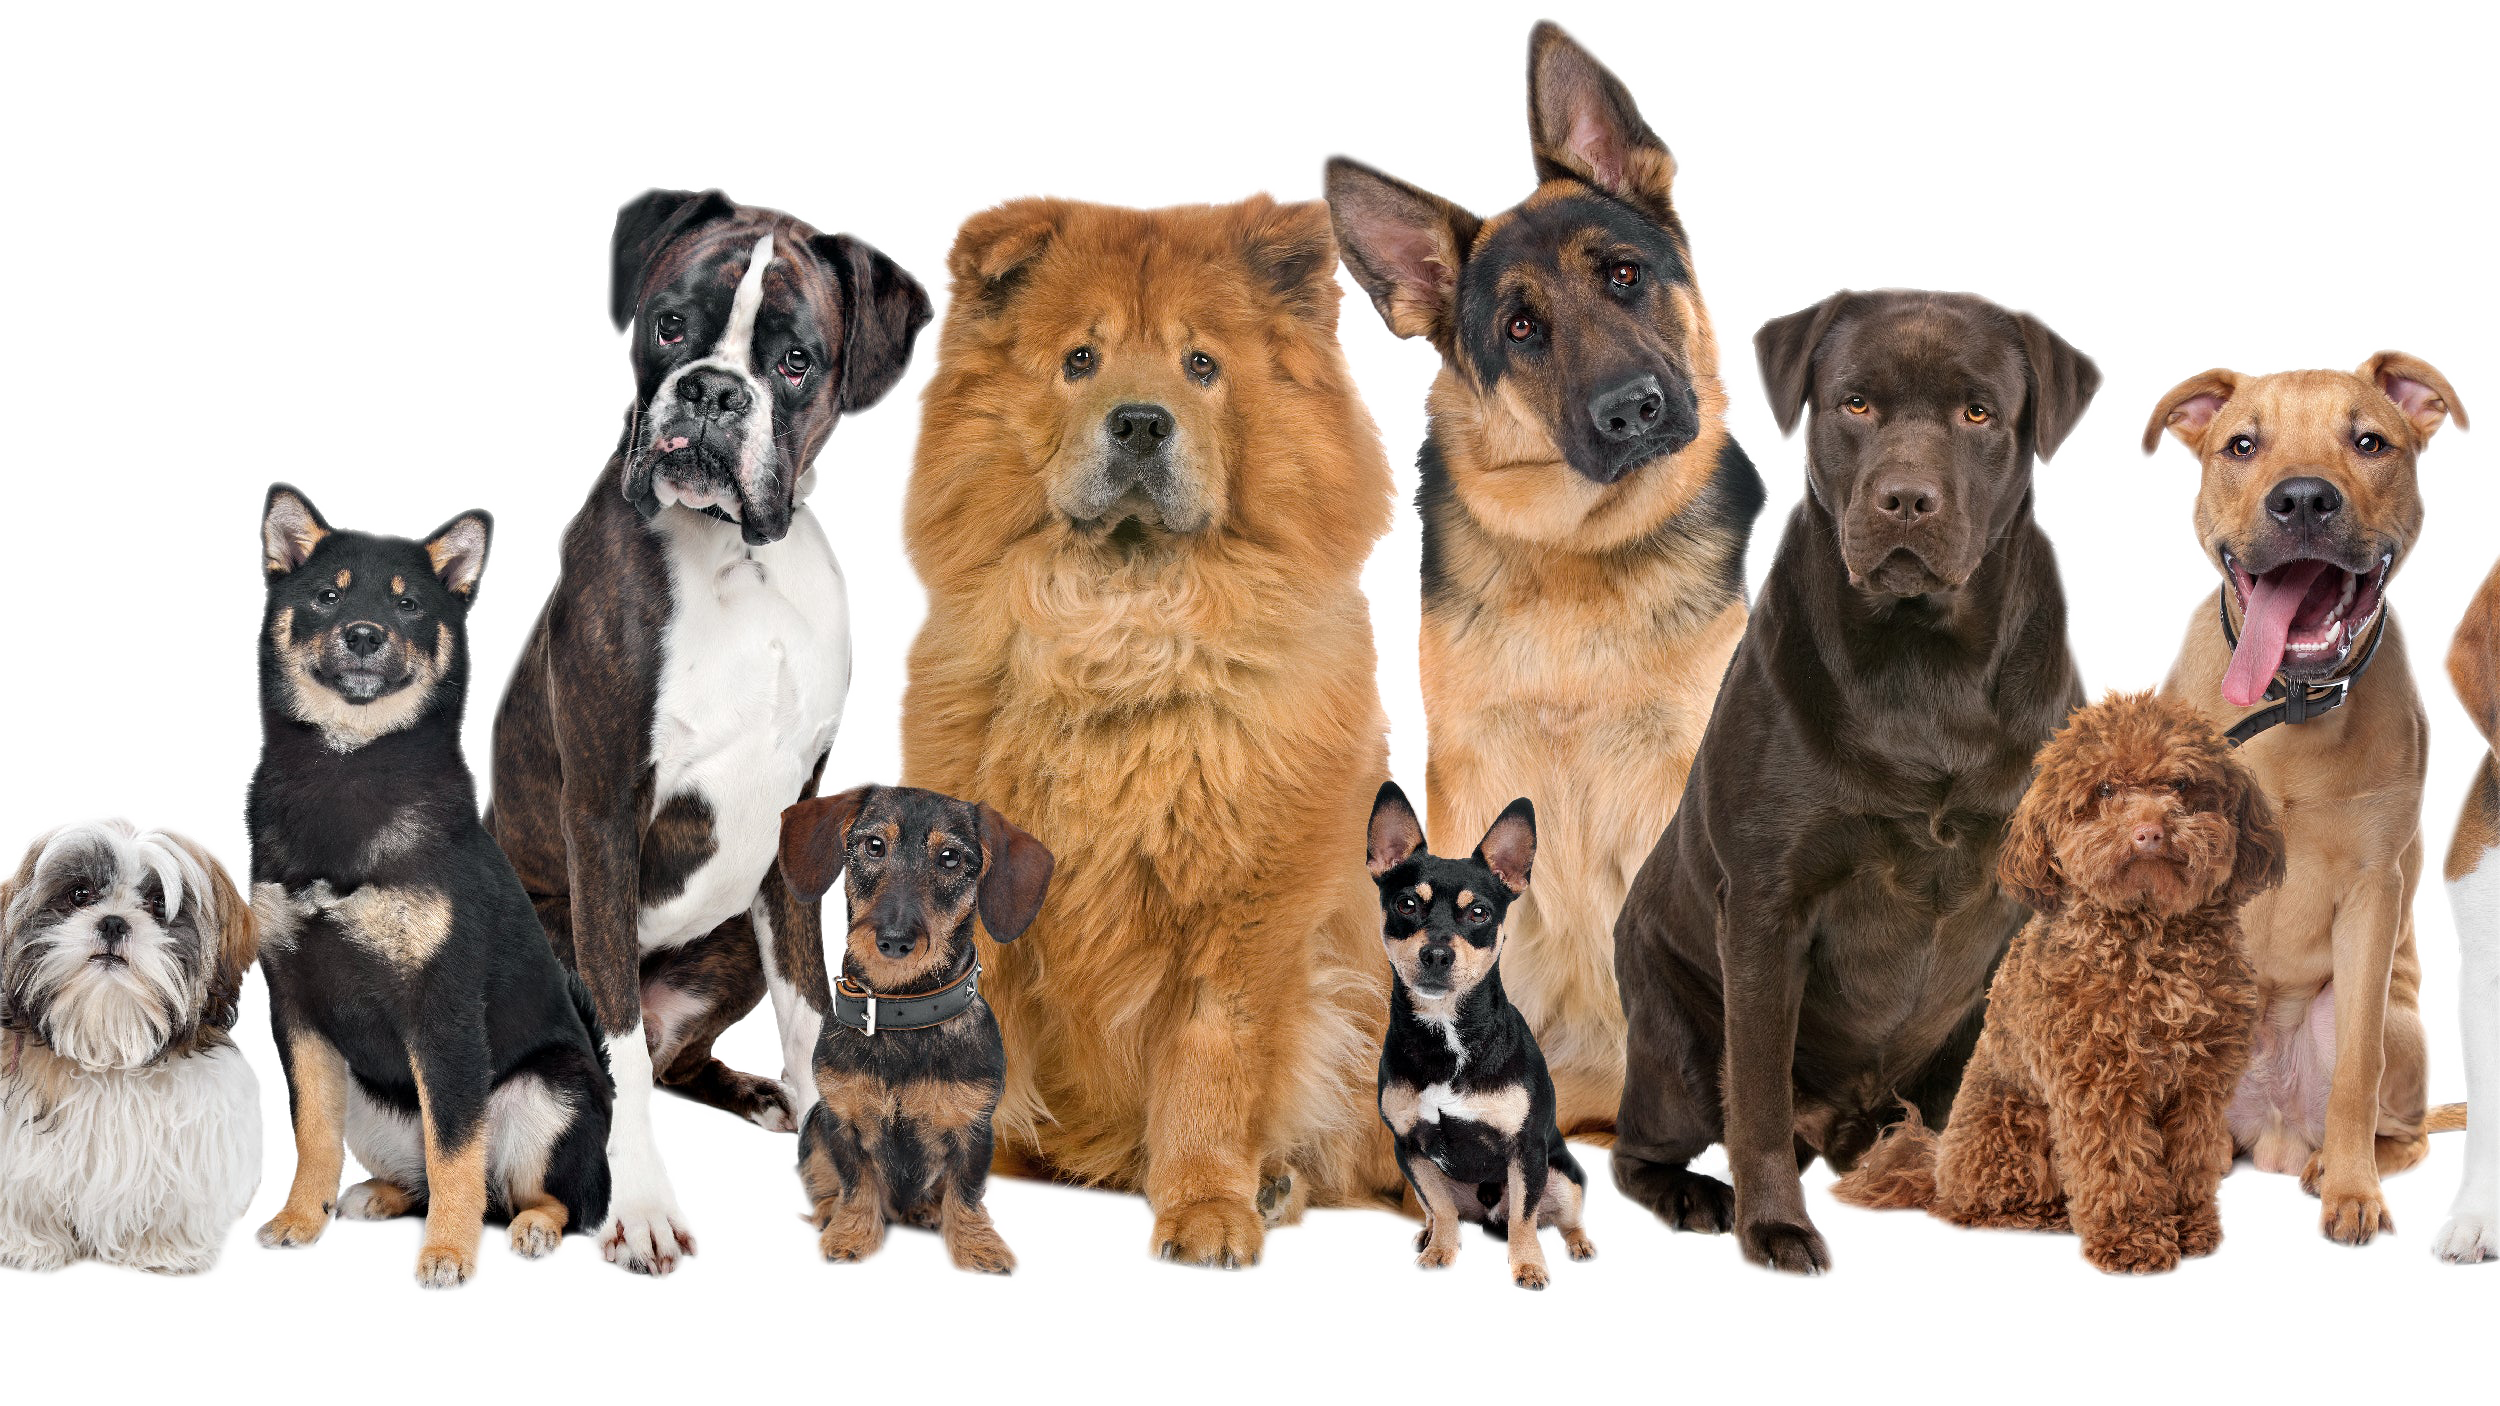 Dogs of varying breeds.